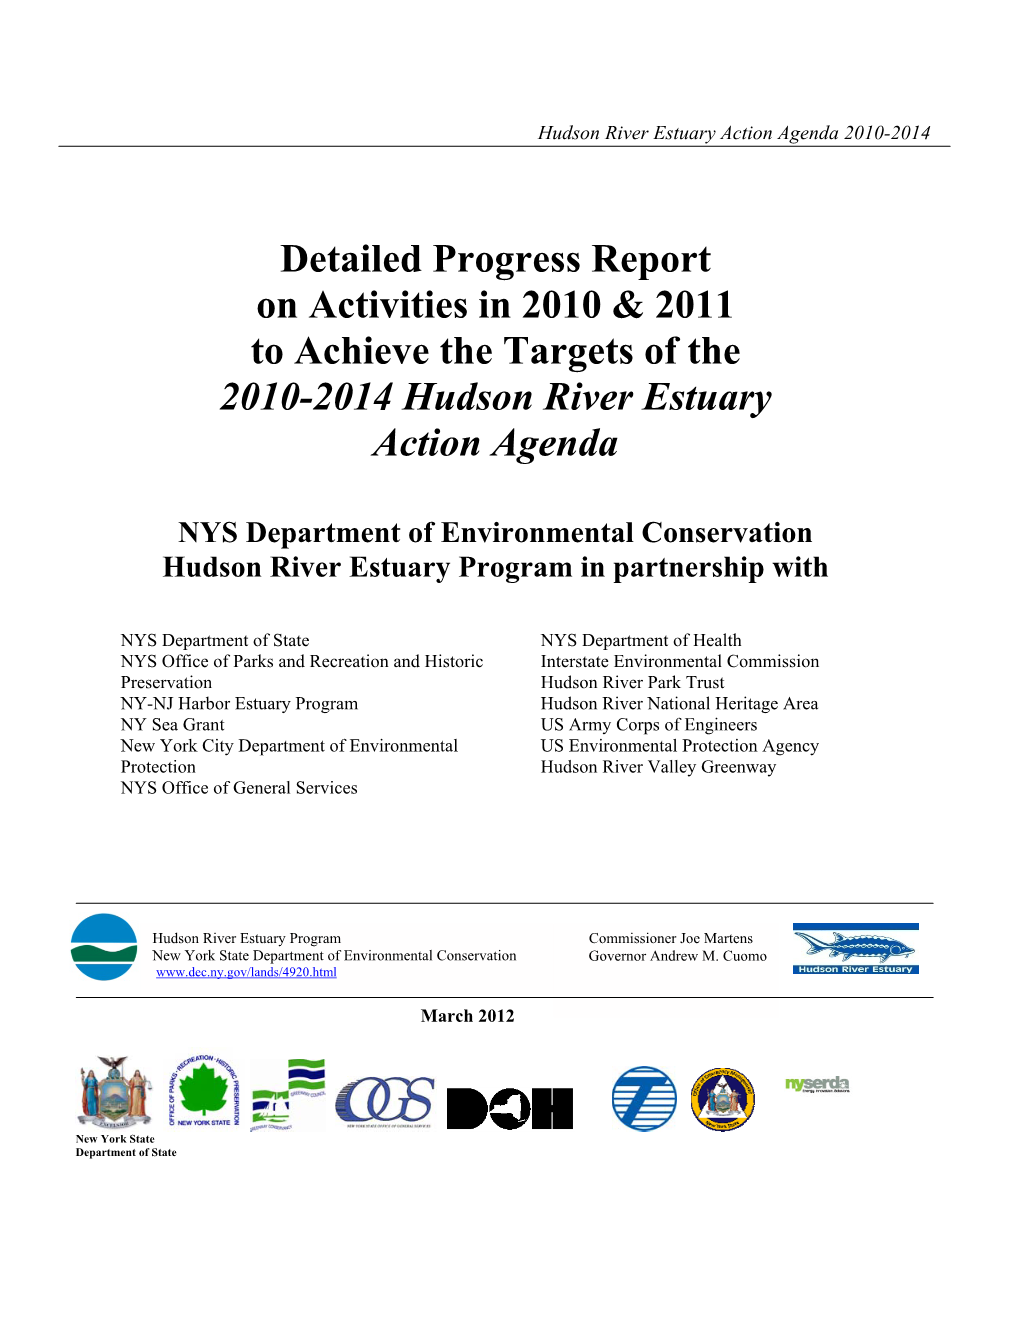 Detailed Progress Report on Activities in 2010 and 2011 to Achieve The